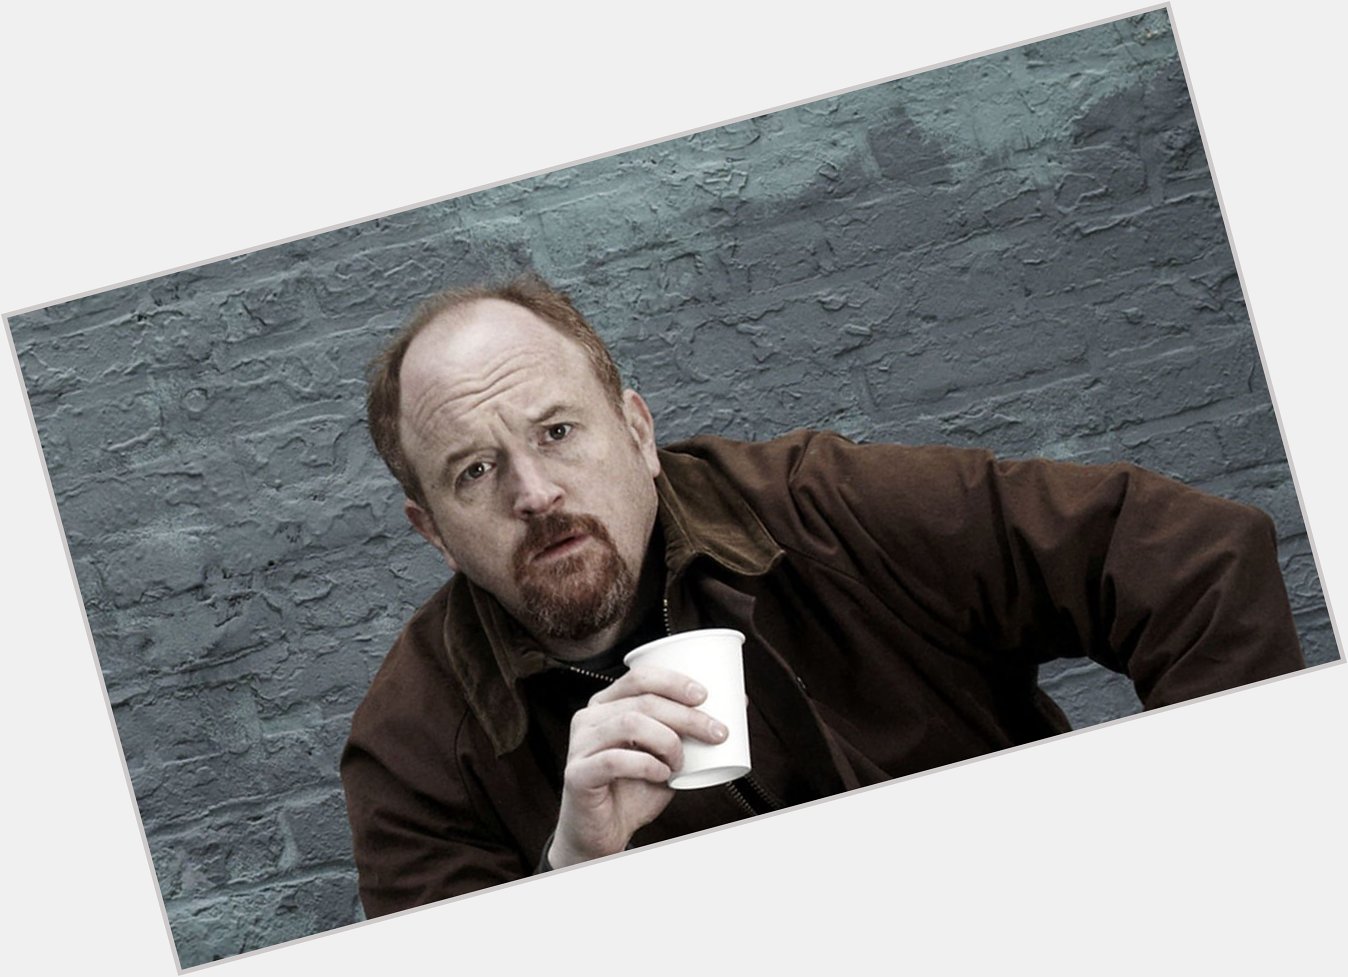 Happy Birthday to Louis C.K., who turns 50 today! 